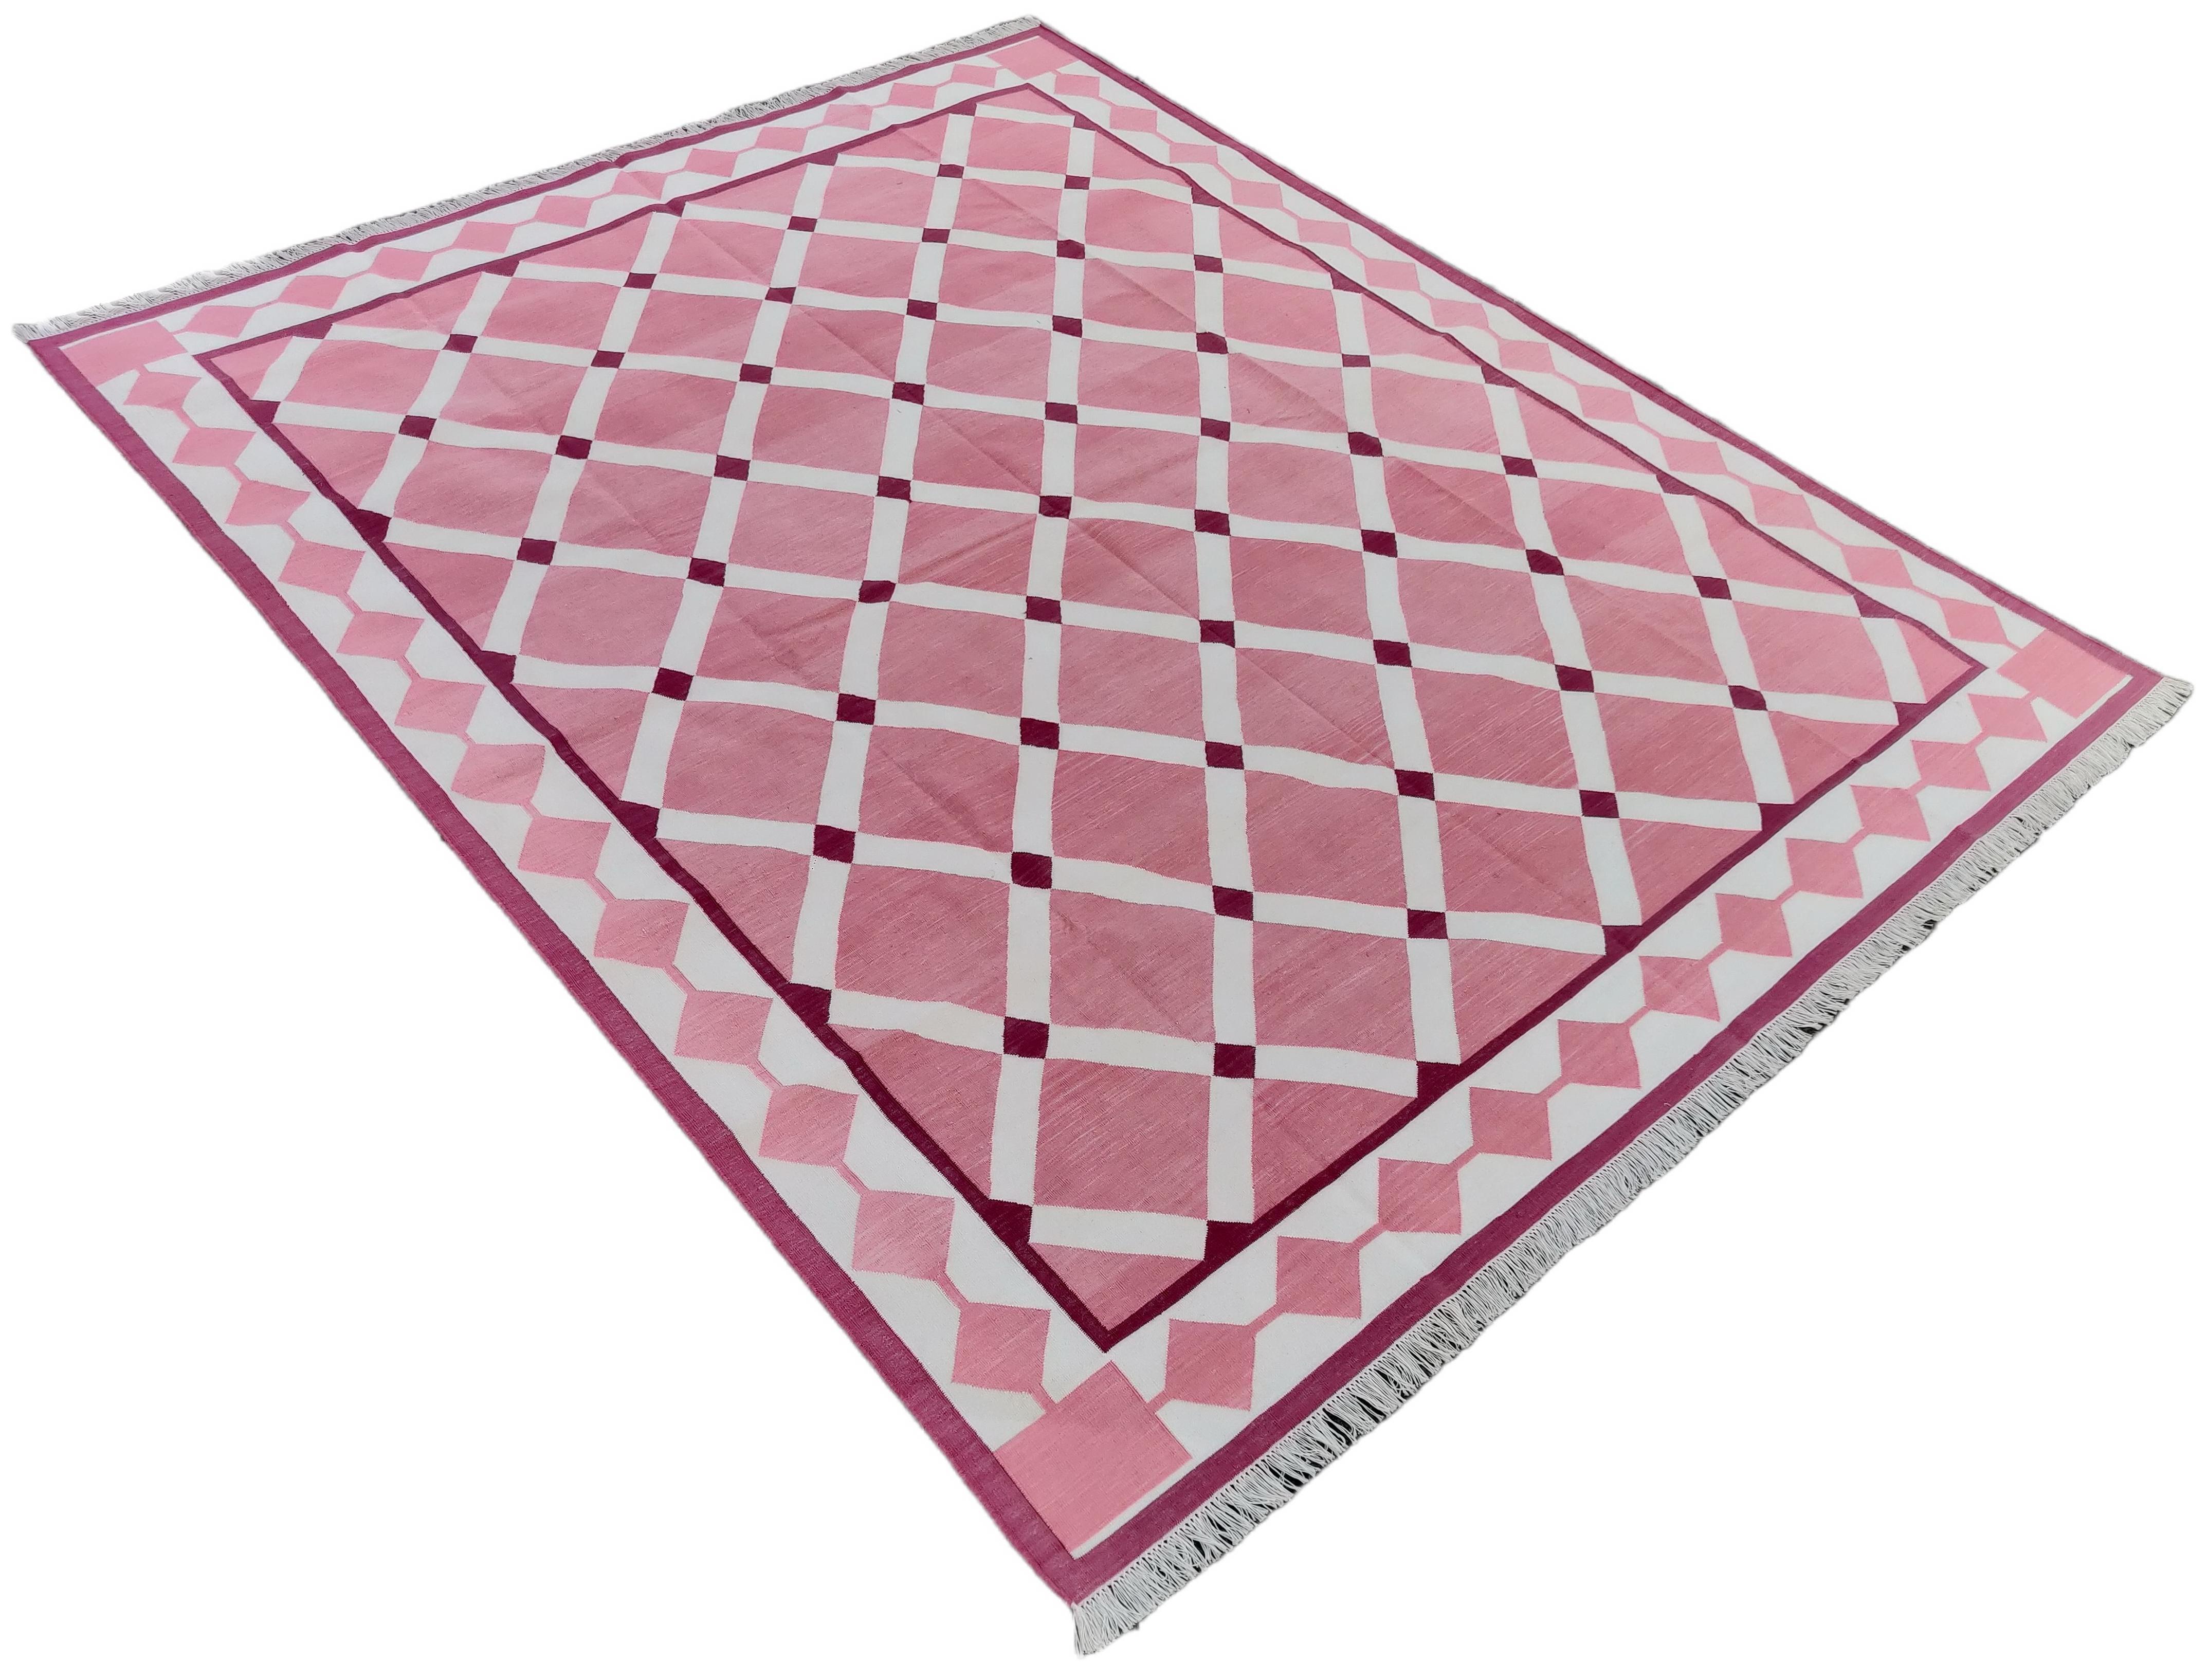 Cotton Vegetable Dyed Reversible Pink And White Indian Star Geometric Rug - 8'x10'
These special flat-weave dhurries are hand-woven with 15 ply 100% cotton yarn. Due to the special manufacturing techniques used to create our rugs, the size and color